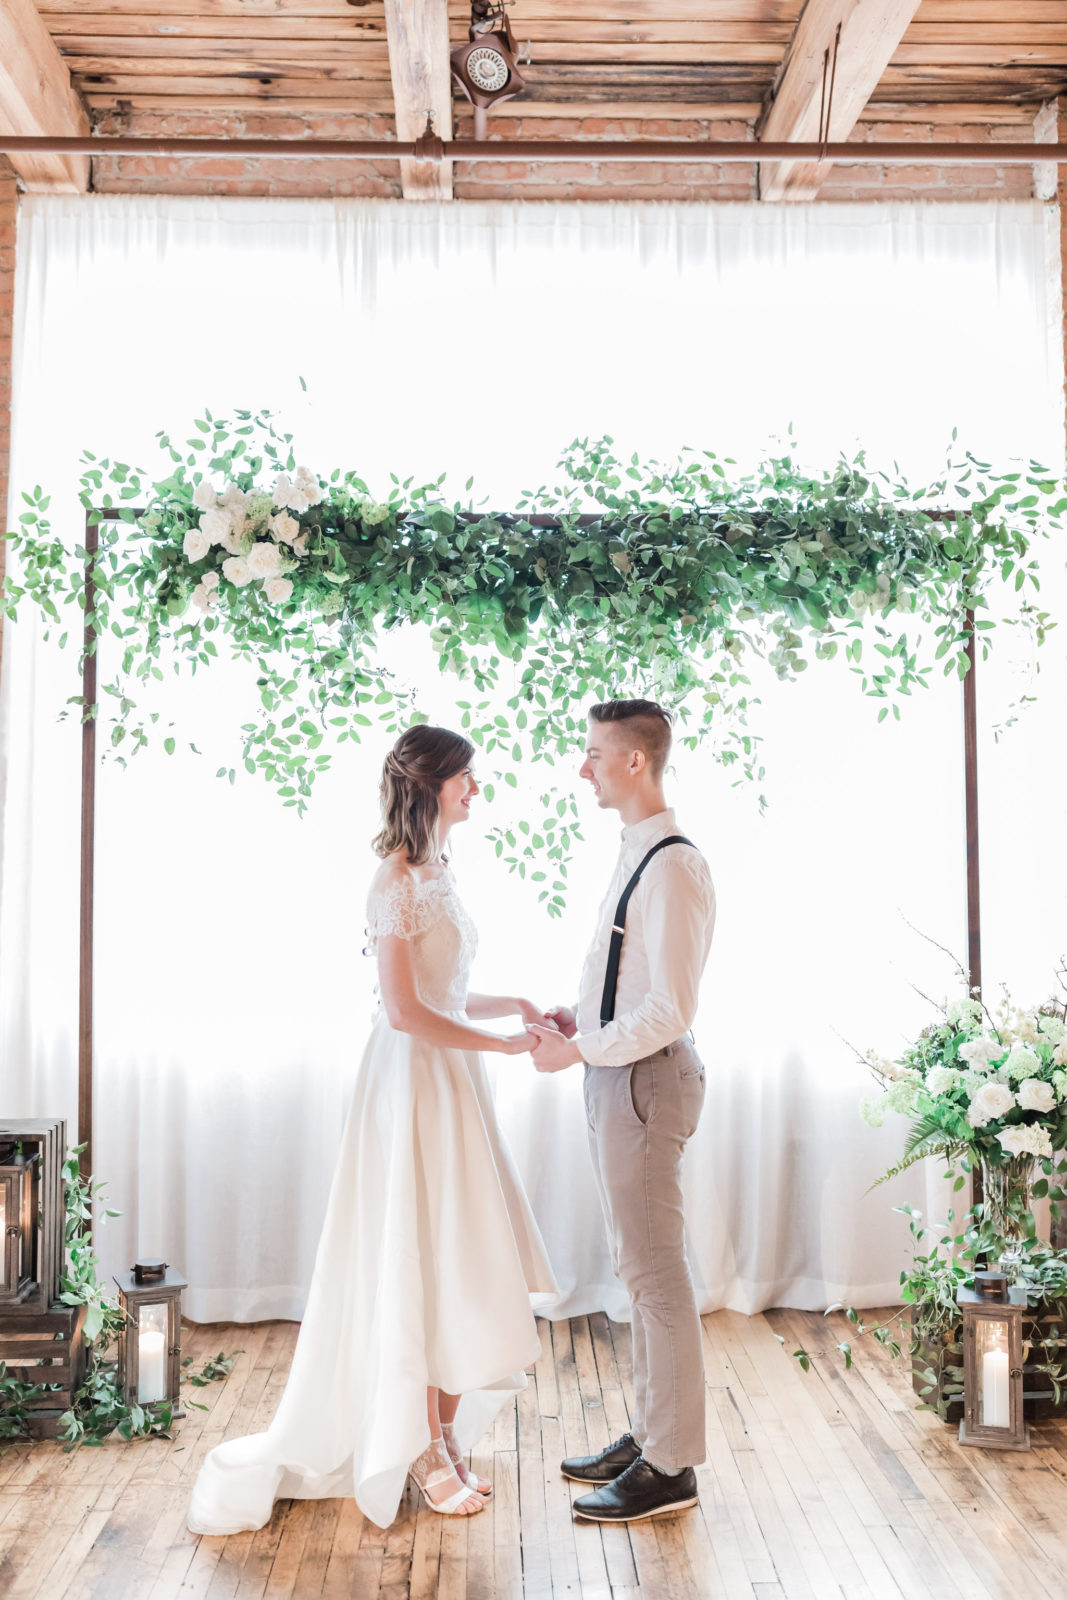 Wedding arch with green foliage and white flowers with bride and groom